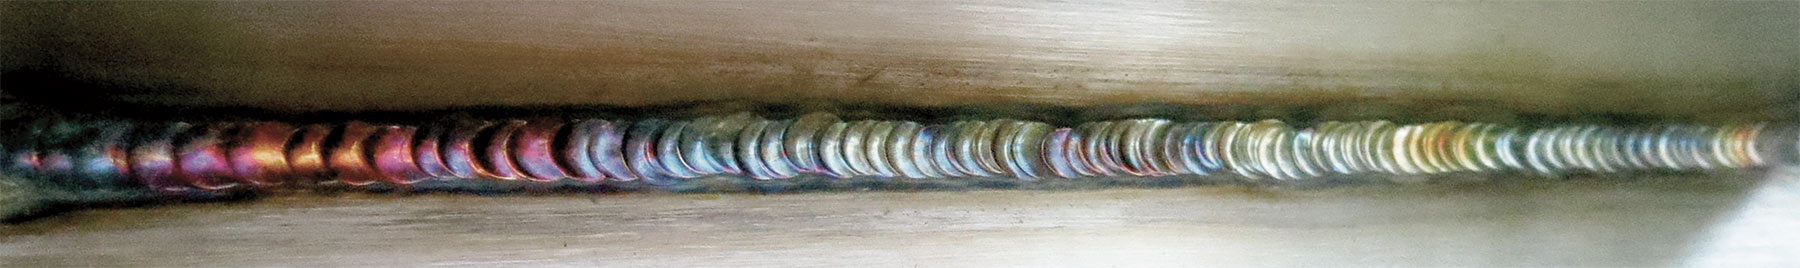 a weld on a piece of metal